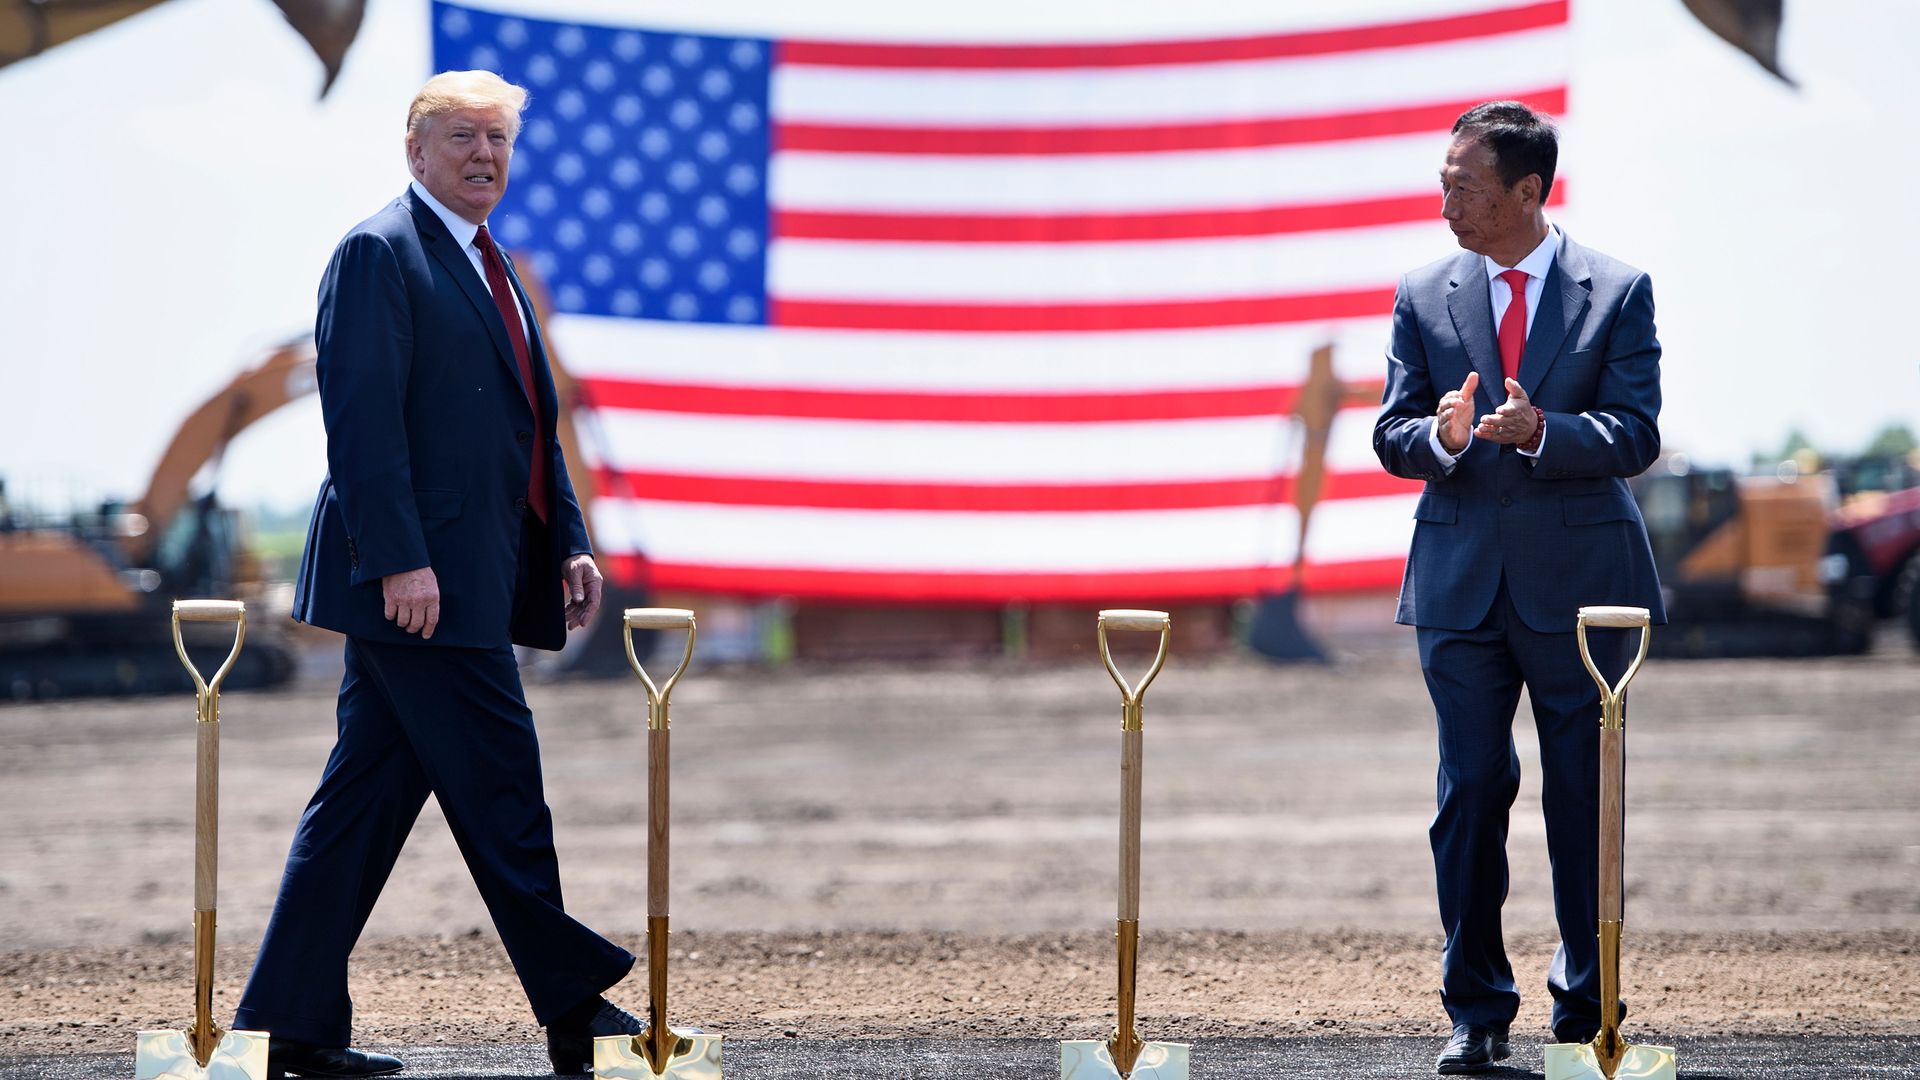 Donald Trump walks to Foxconn Chairman Terry Gou at groundbreaking with shovels and American flag.